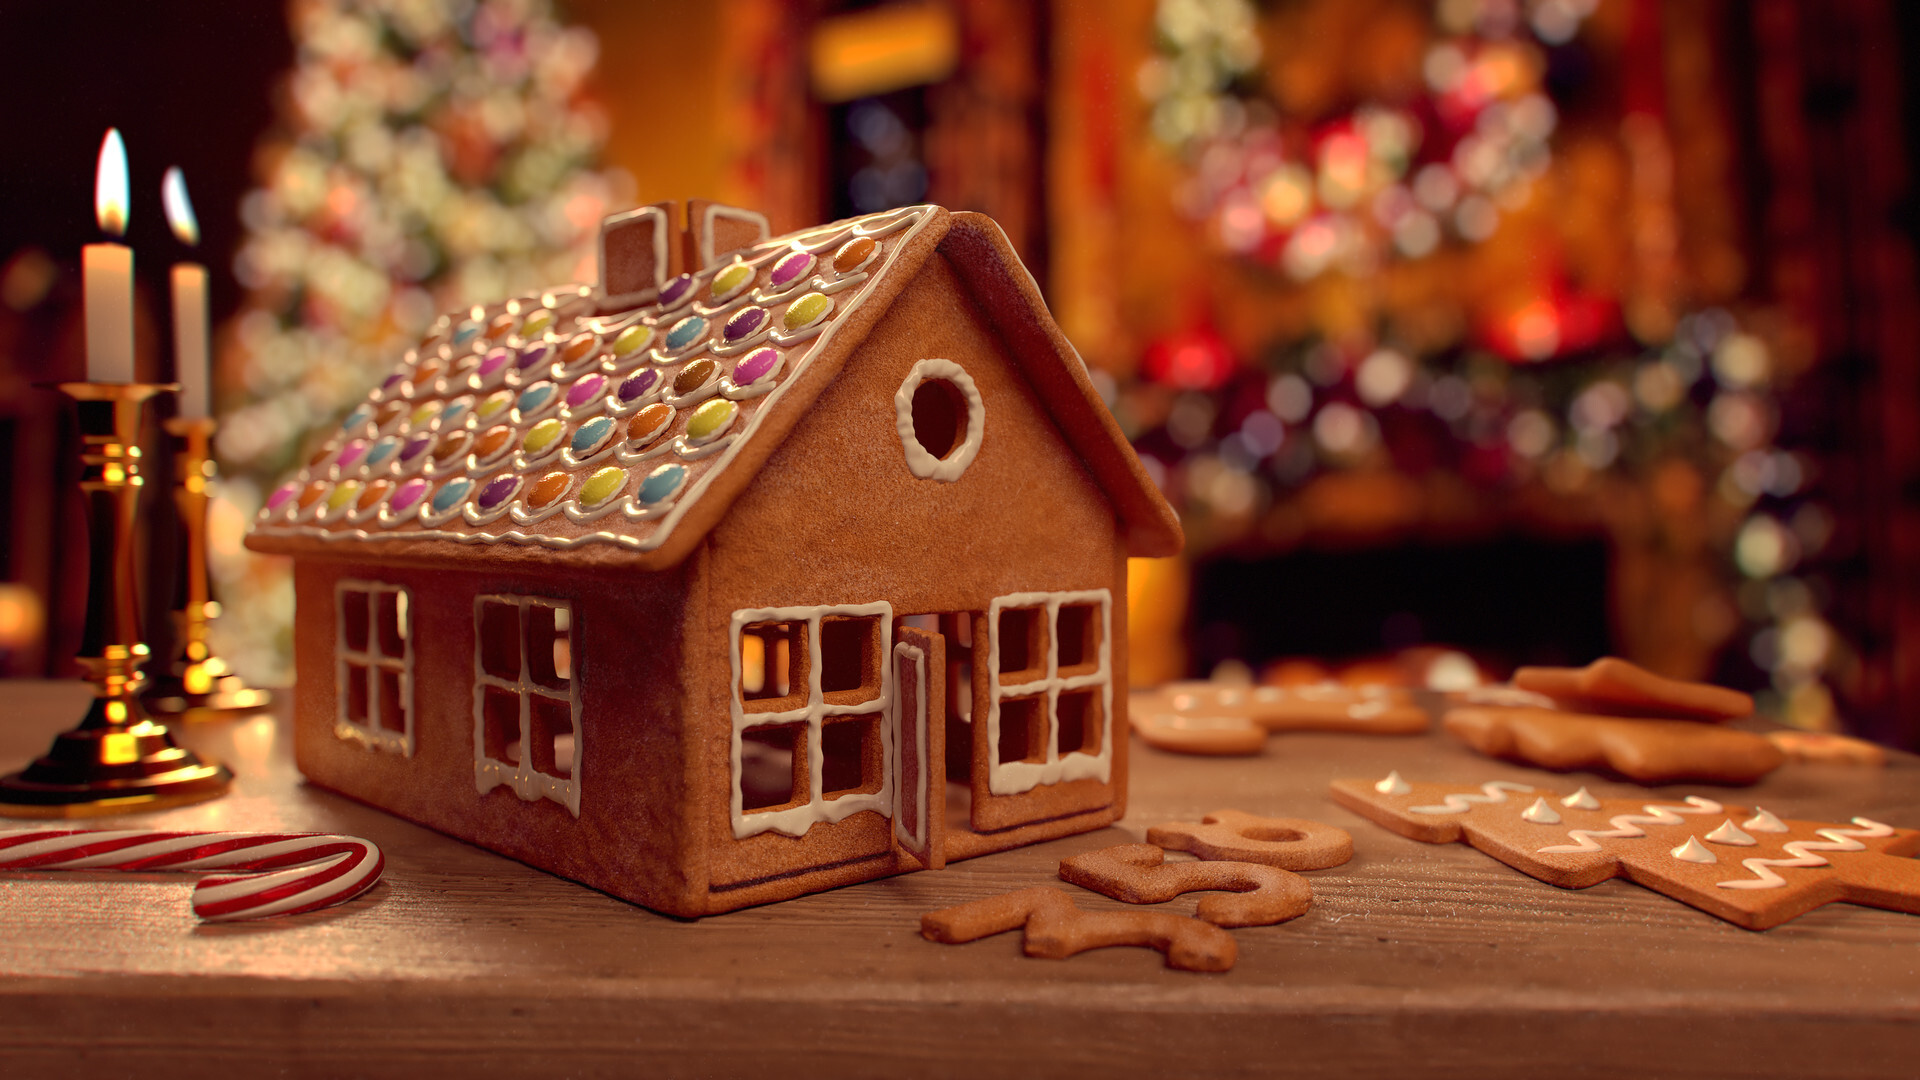 Gingerbread House: Houese decorated with royal icing and candies, Candy canes, Classic ginger cookies baked in cinnamon sugar. 1920x1080 Full HD Wallpaper.